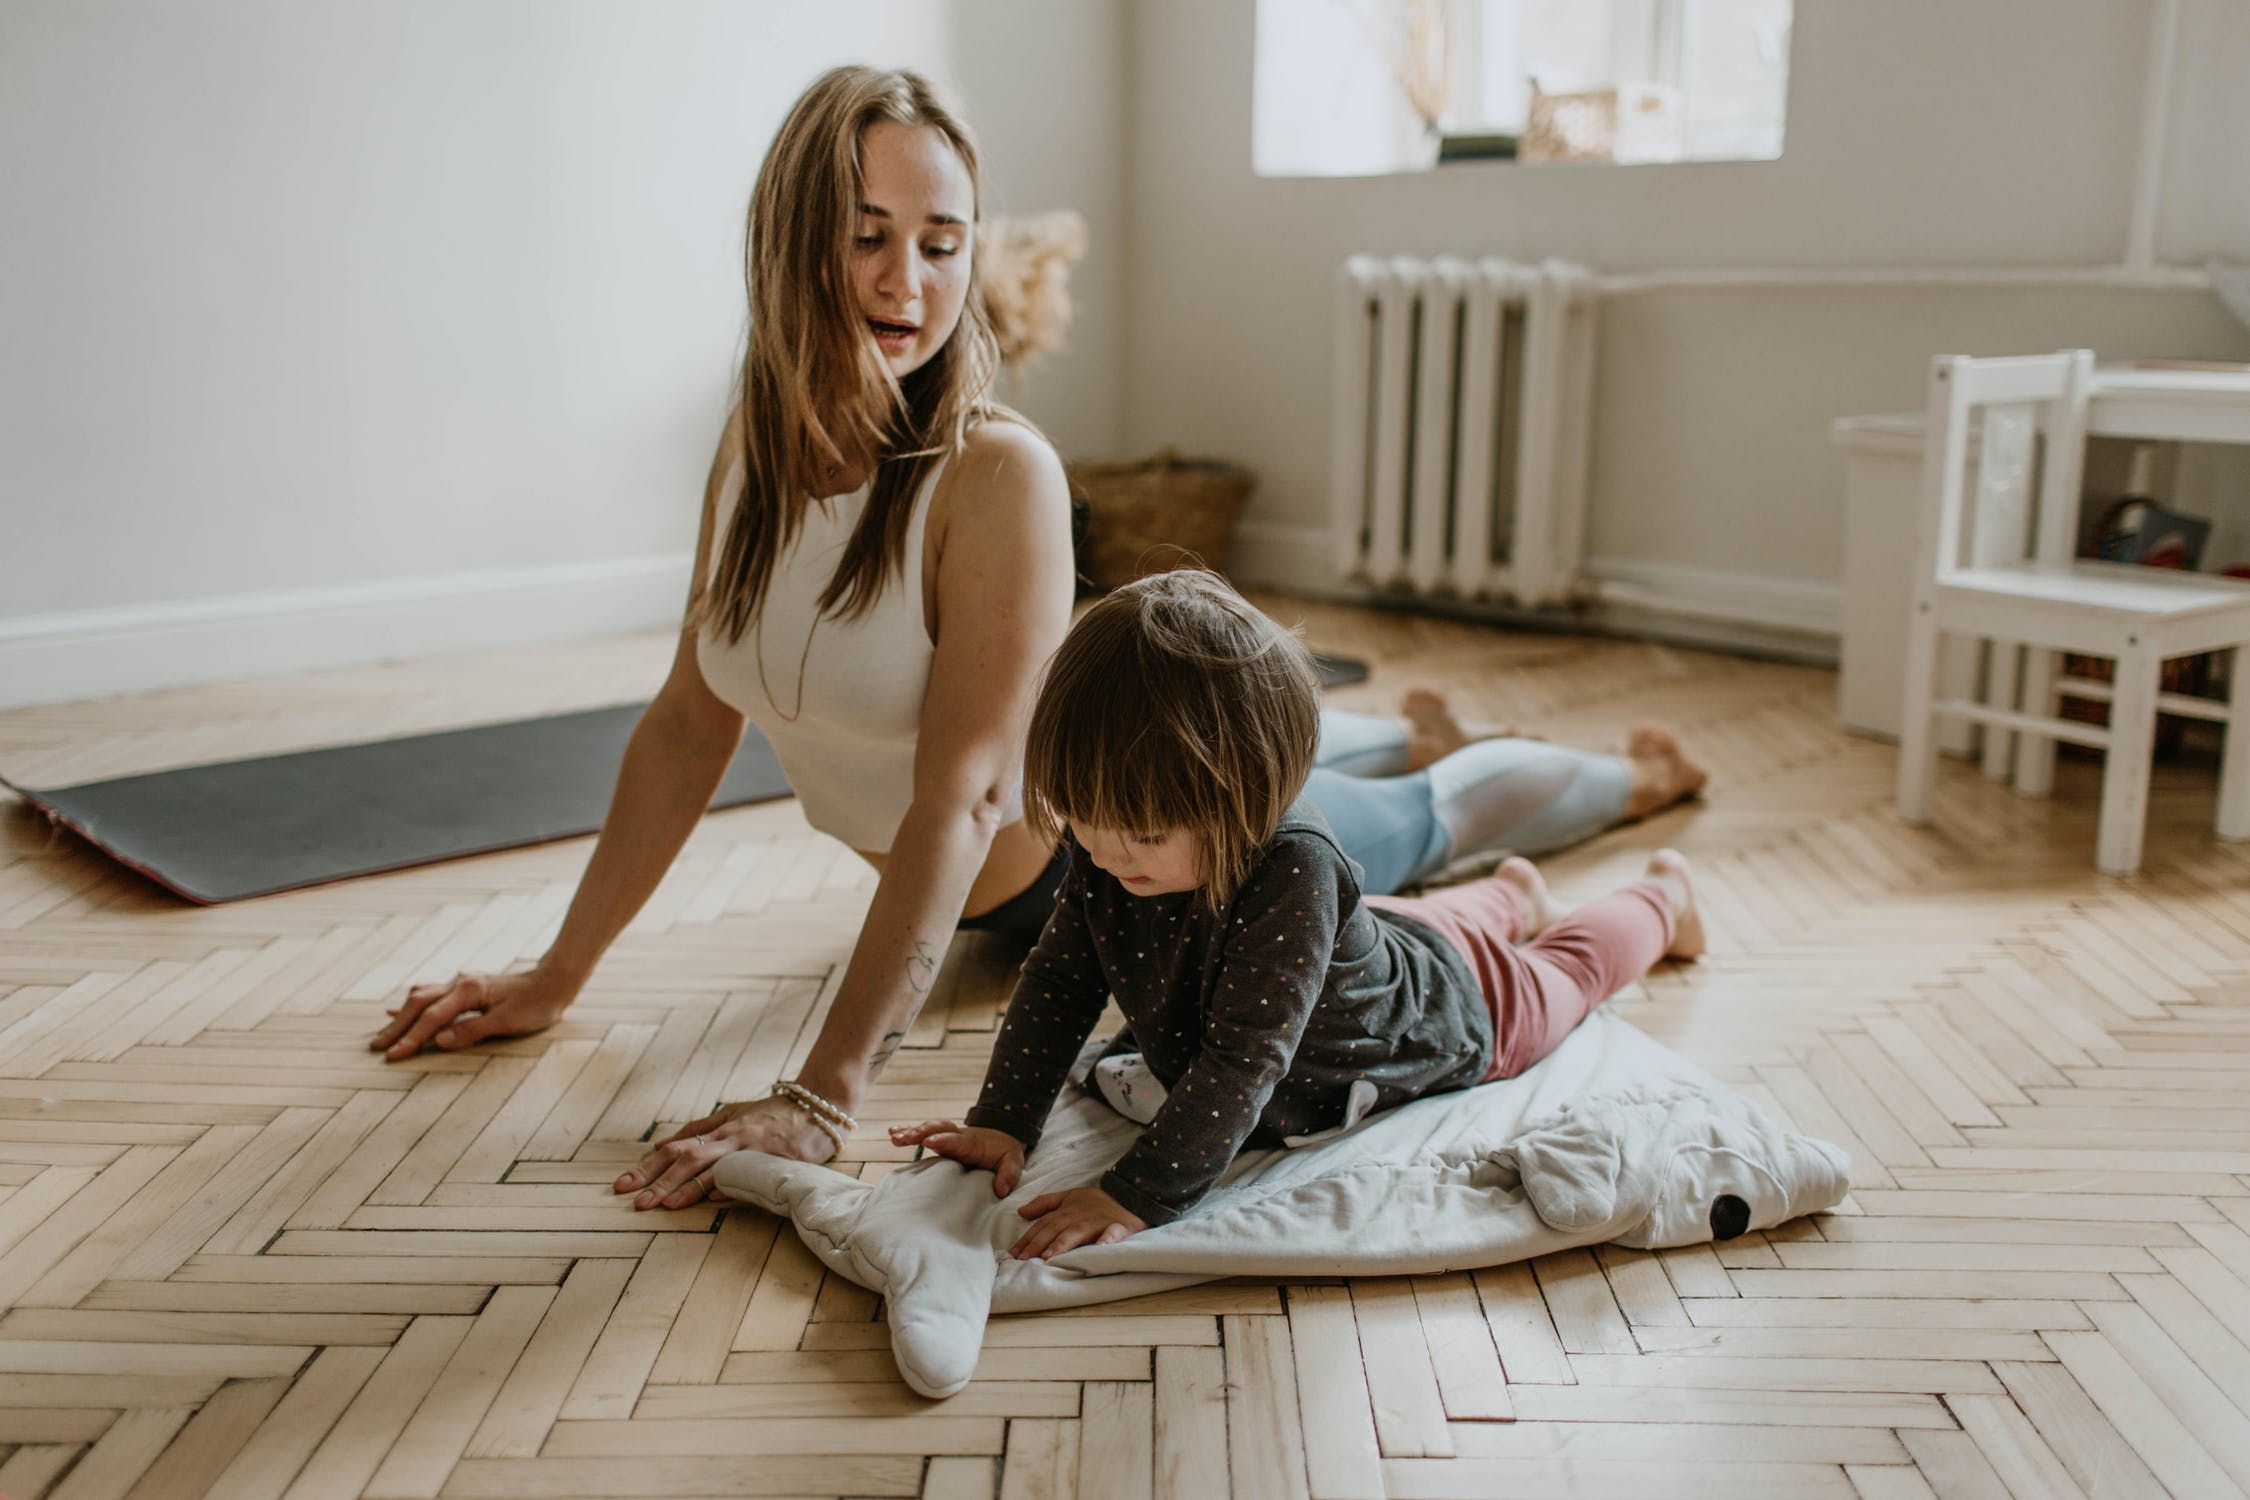 Growing up with mom | Source: Pexels